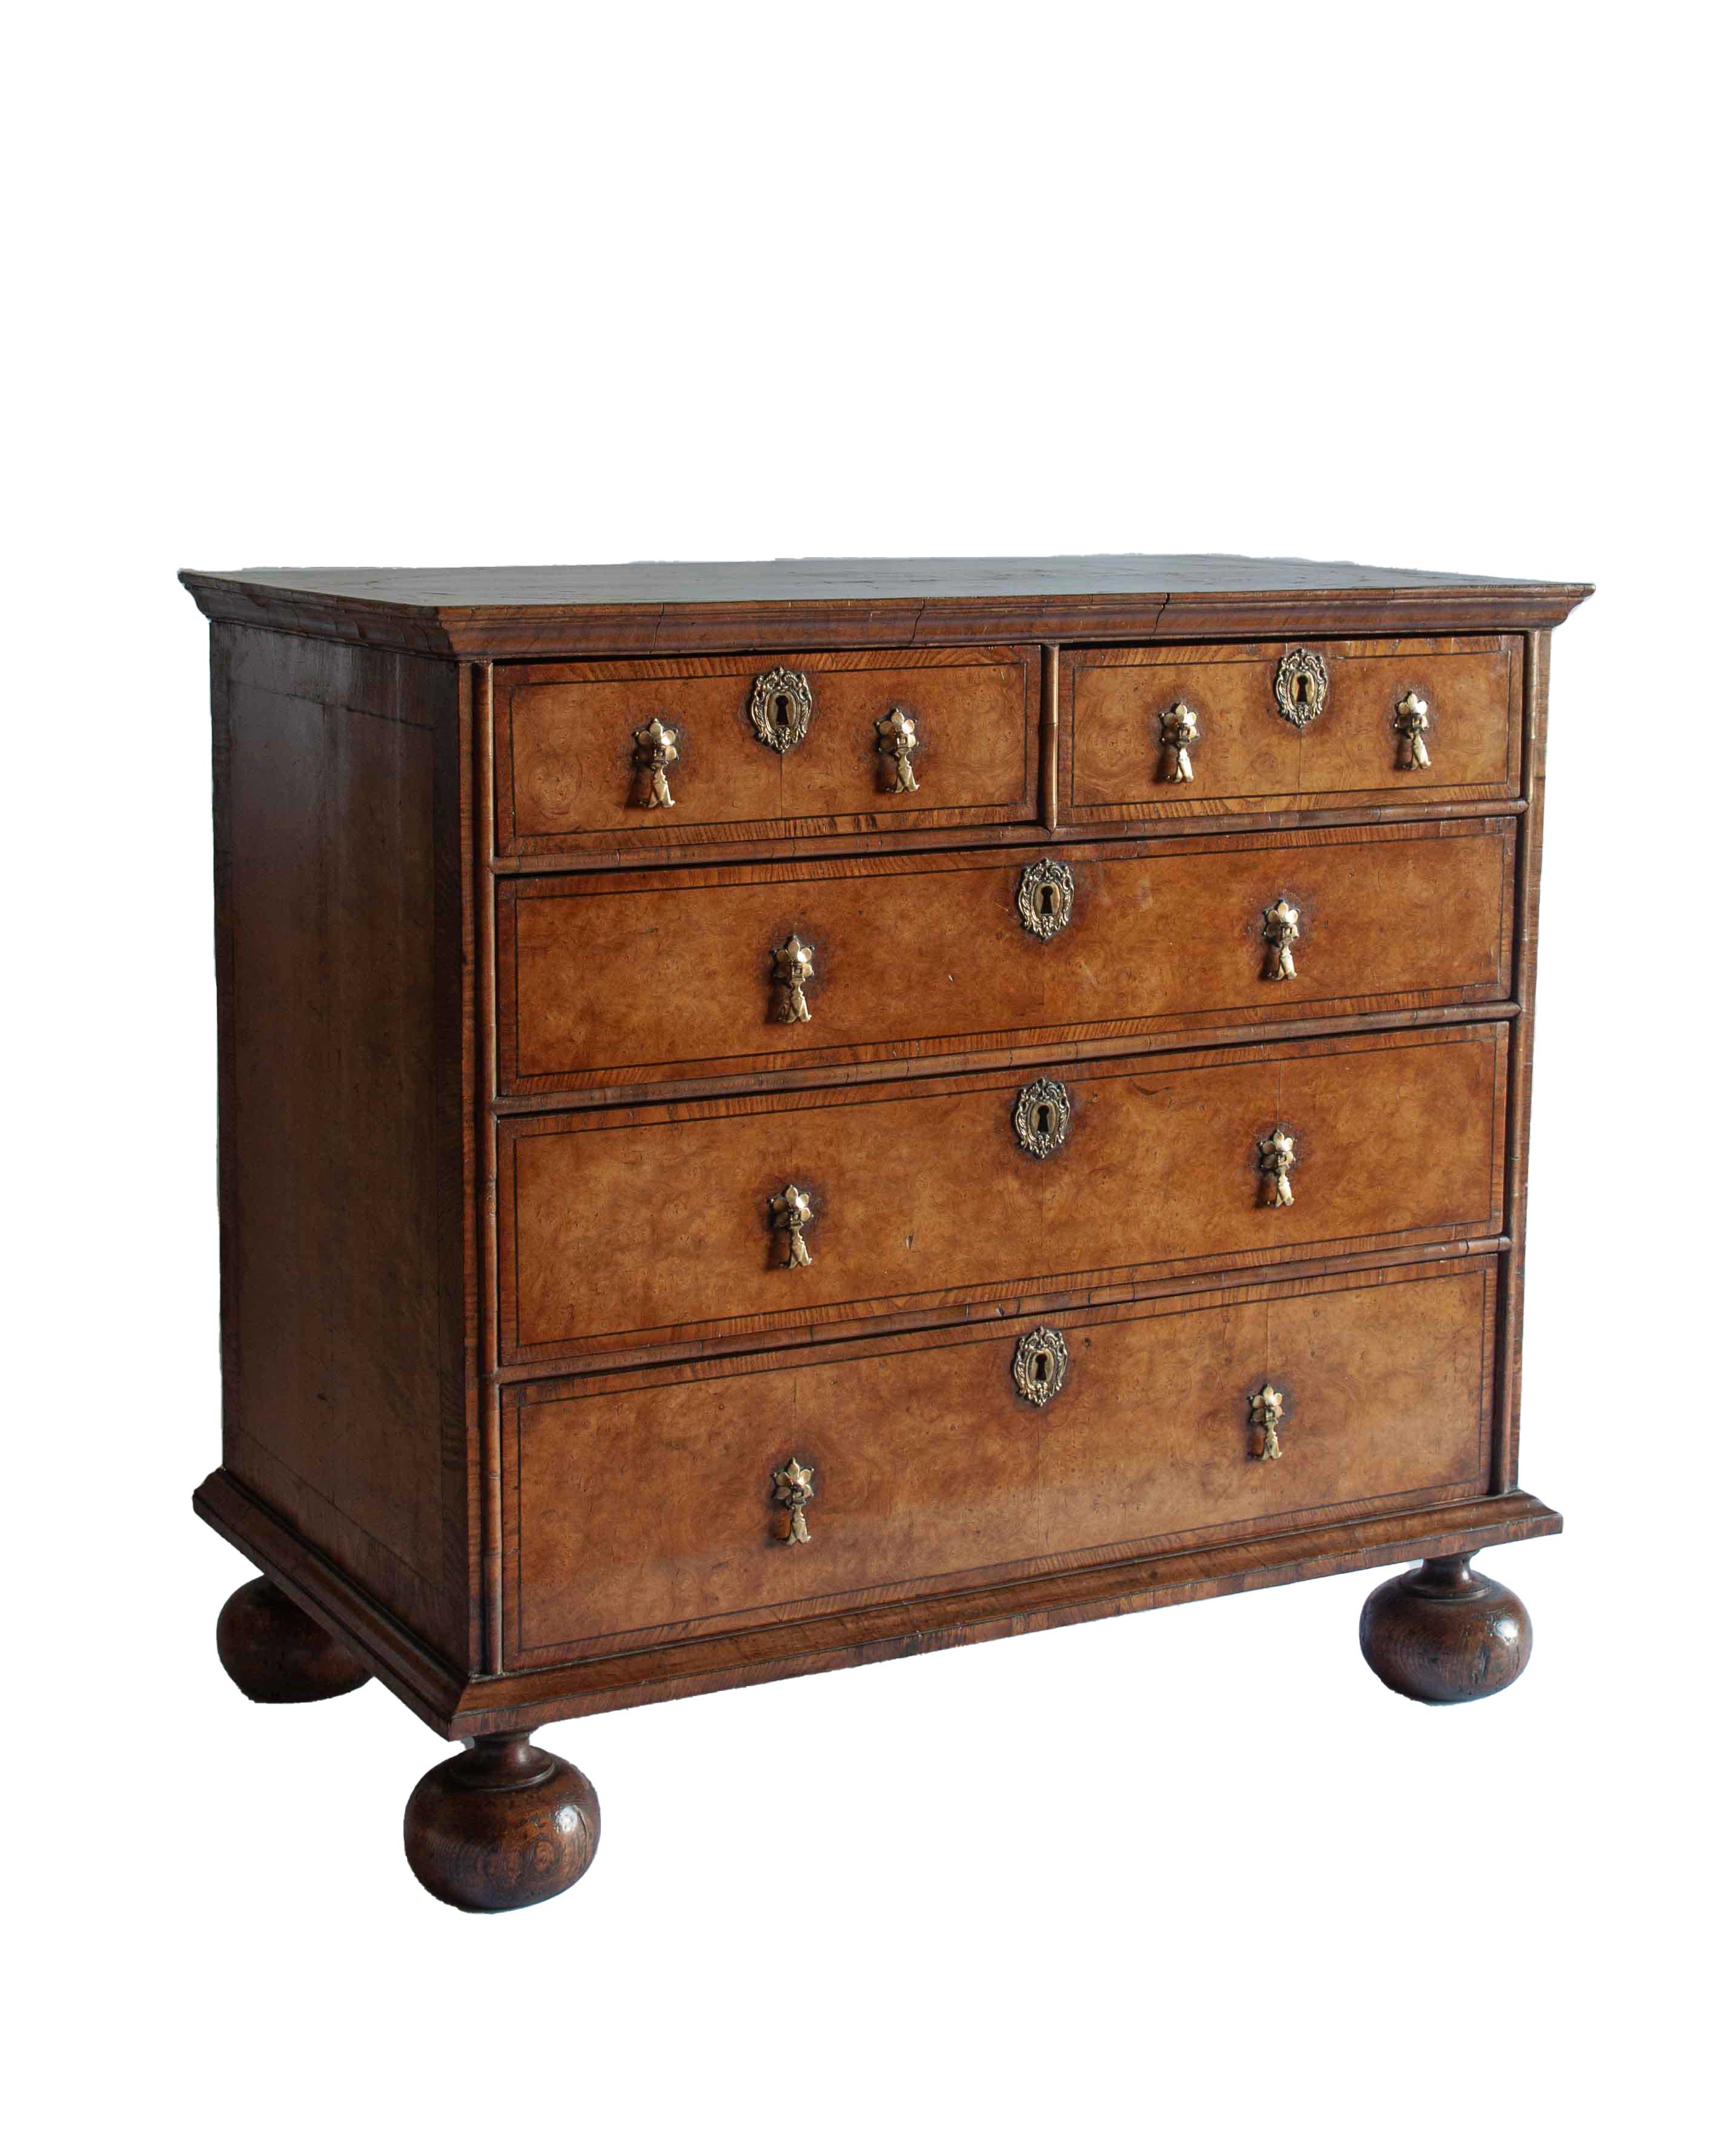 17th Century Burr Elm Chest of Drawers | Anboise Antiques